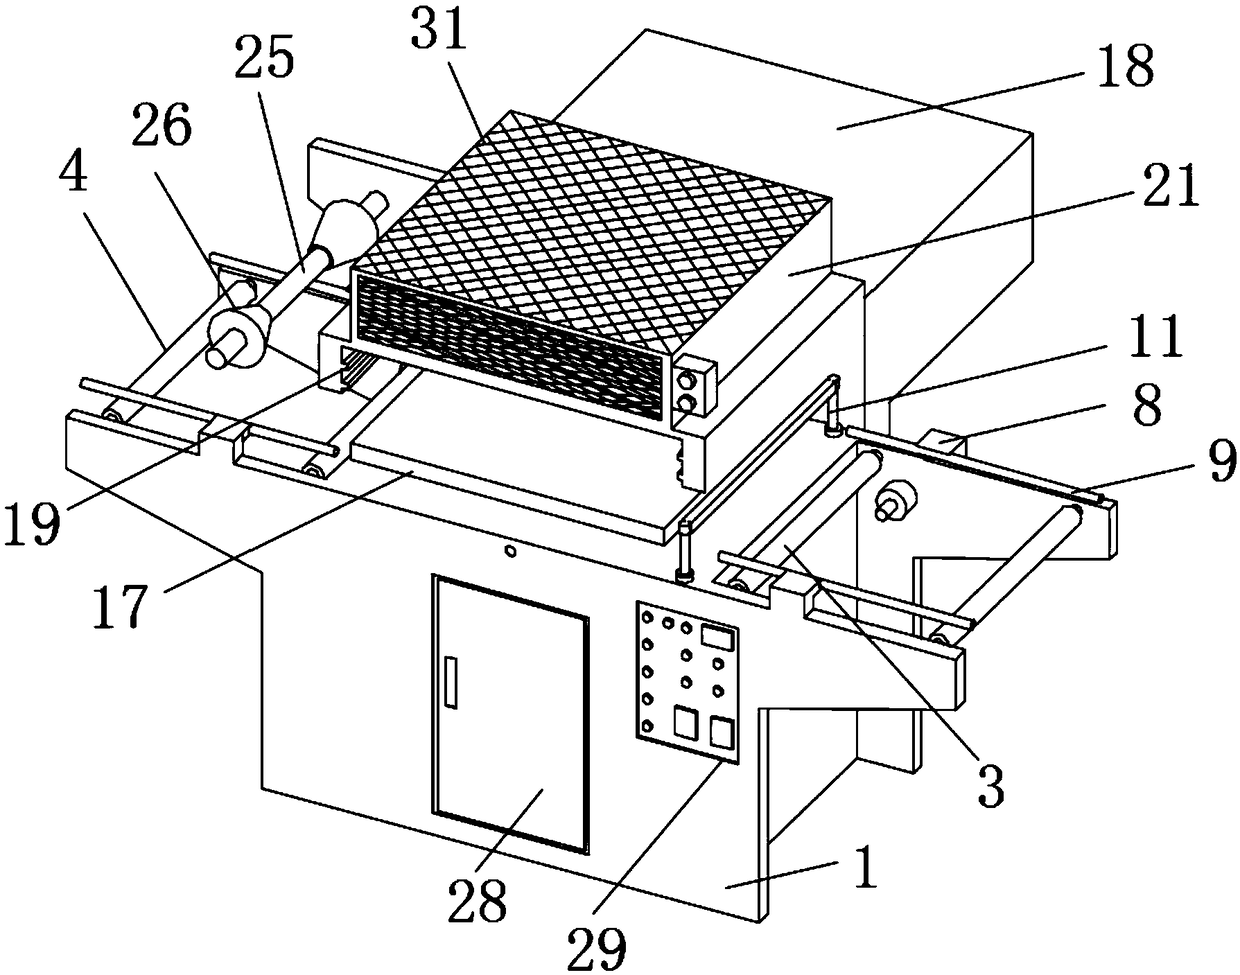 Packaging and film covering device for formed EPS foam board